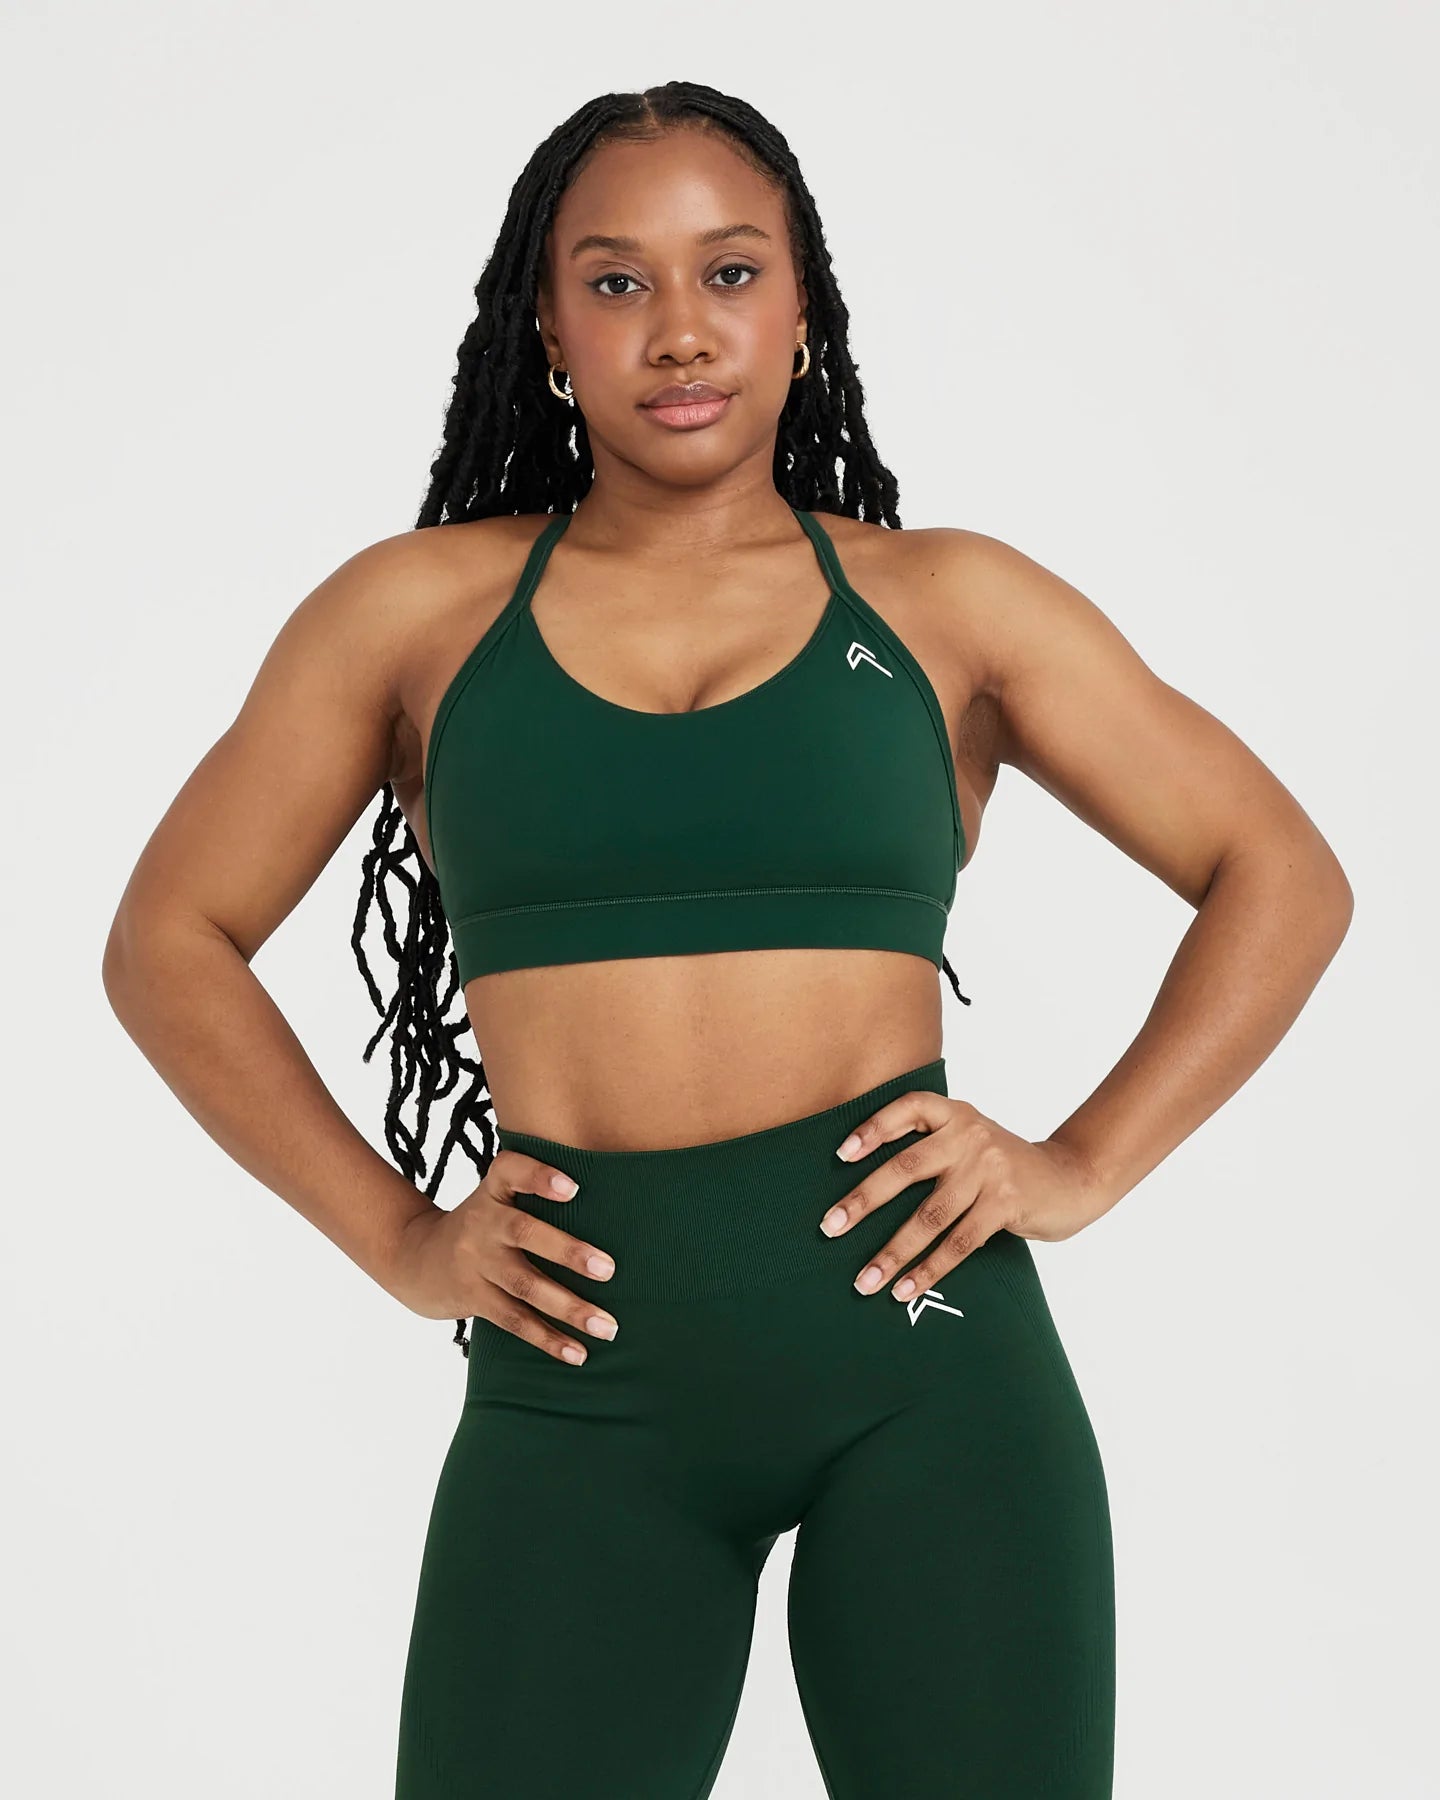 Fast&Up Sports Bra - Ideal for Training